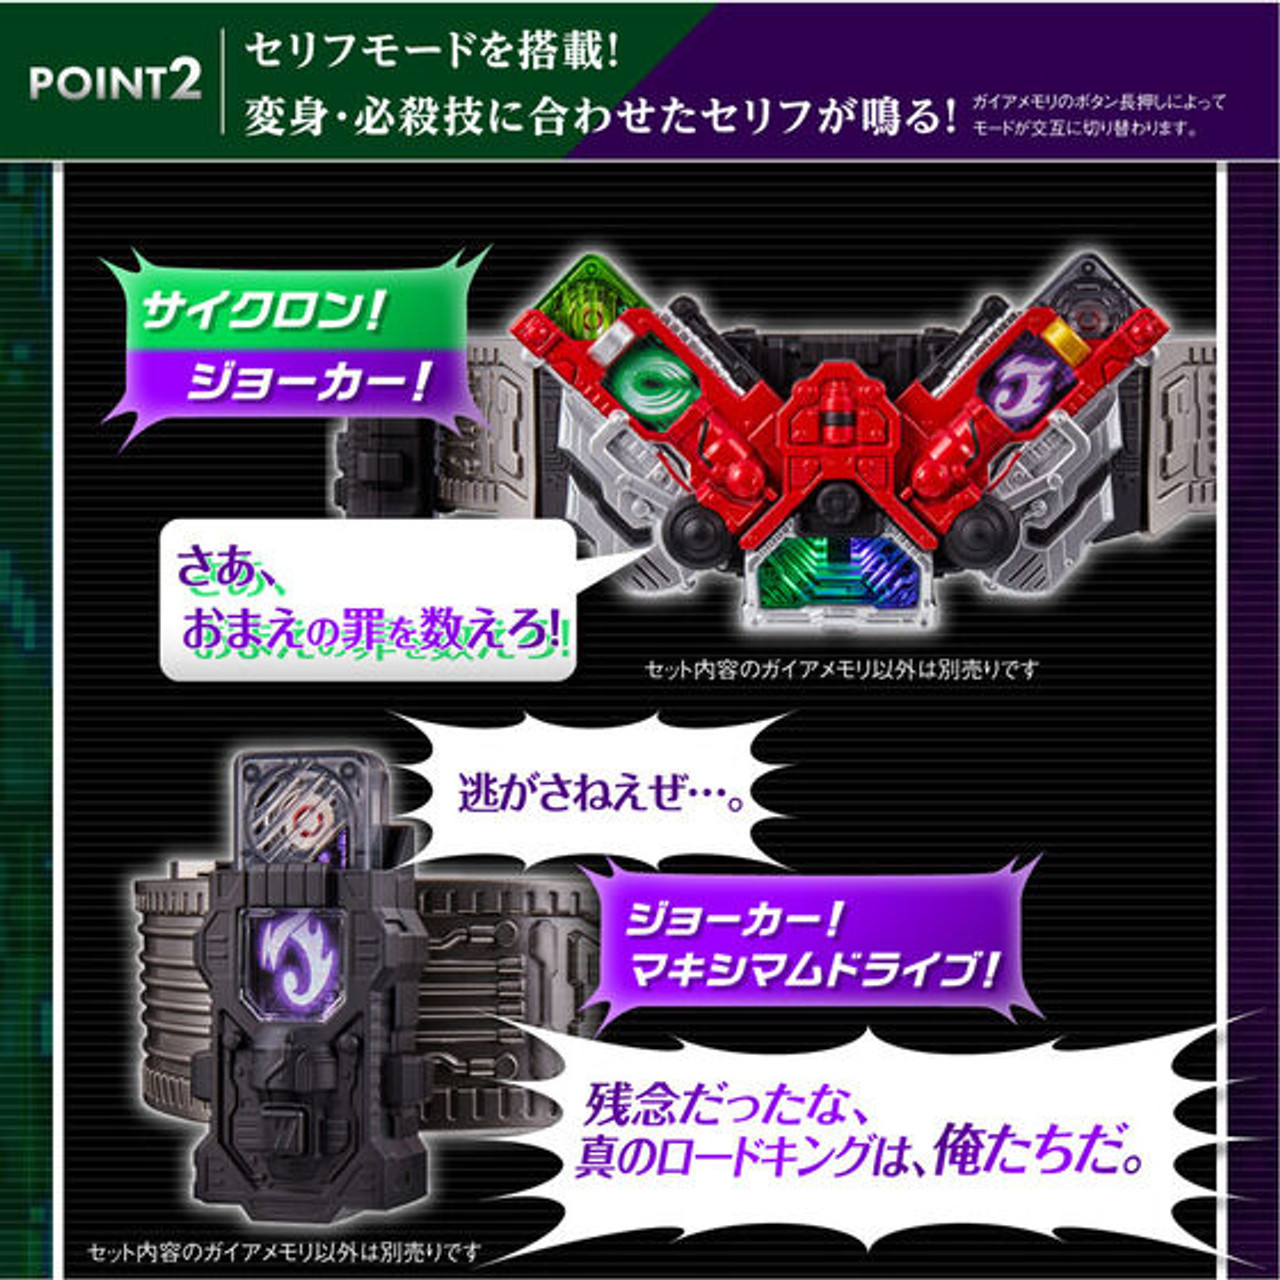 Blu-ray] Fuuto PI The STAGE with Cyclone Memory and Joker Memory